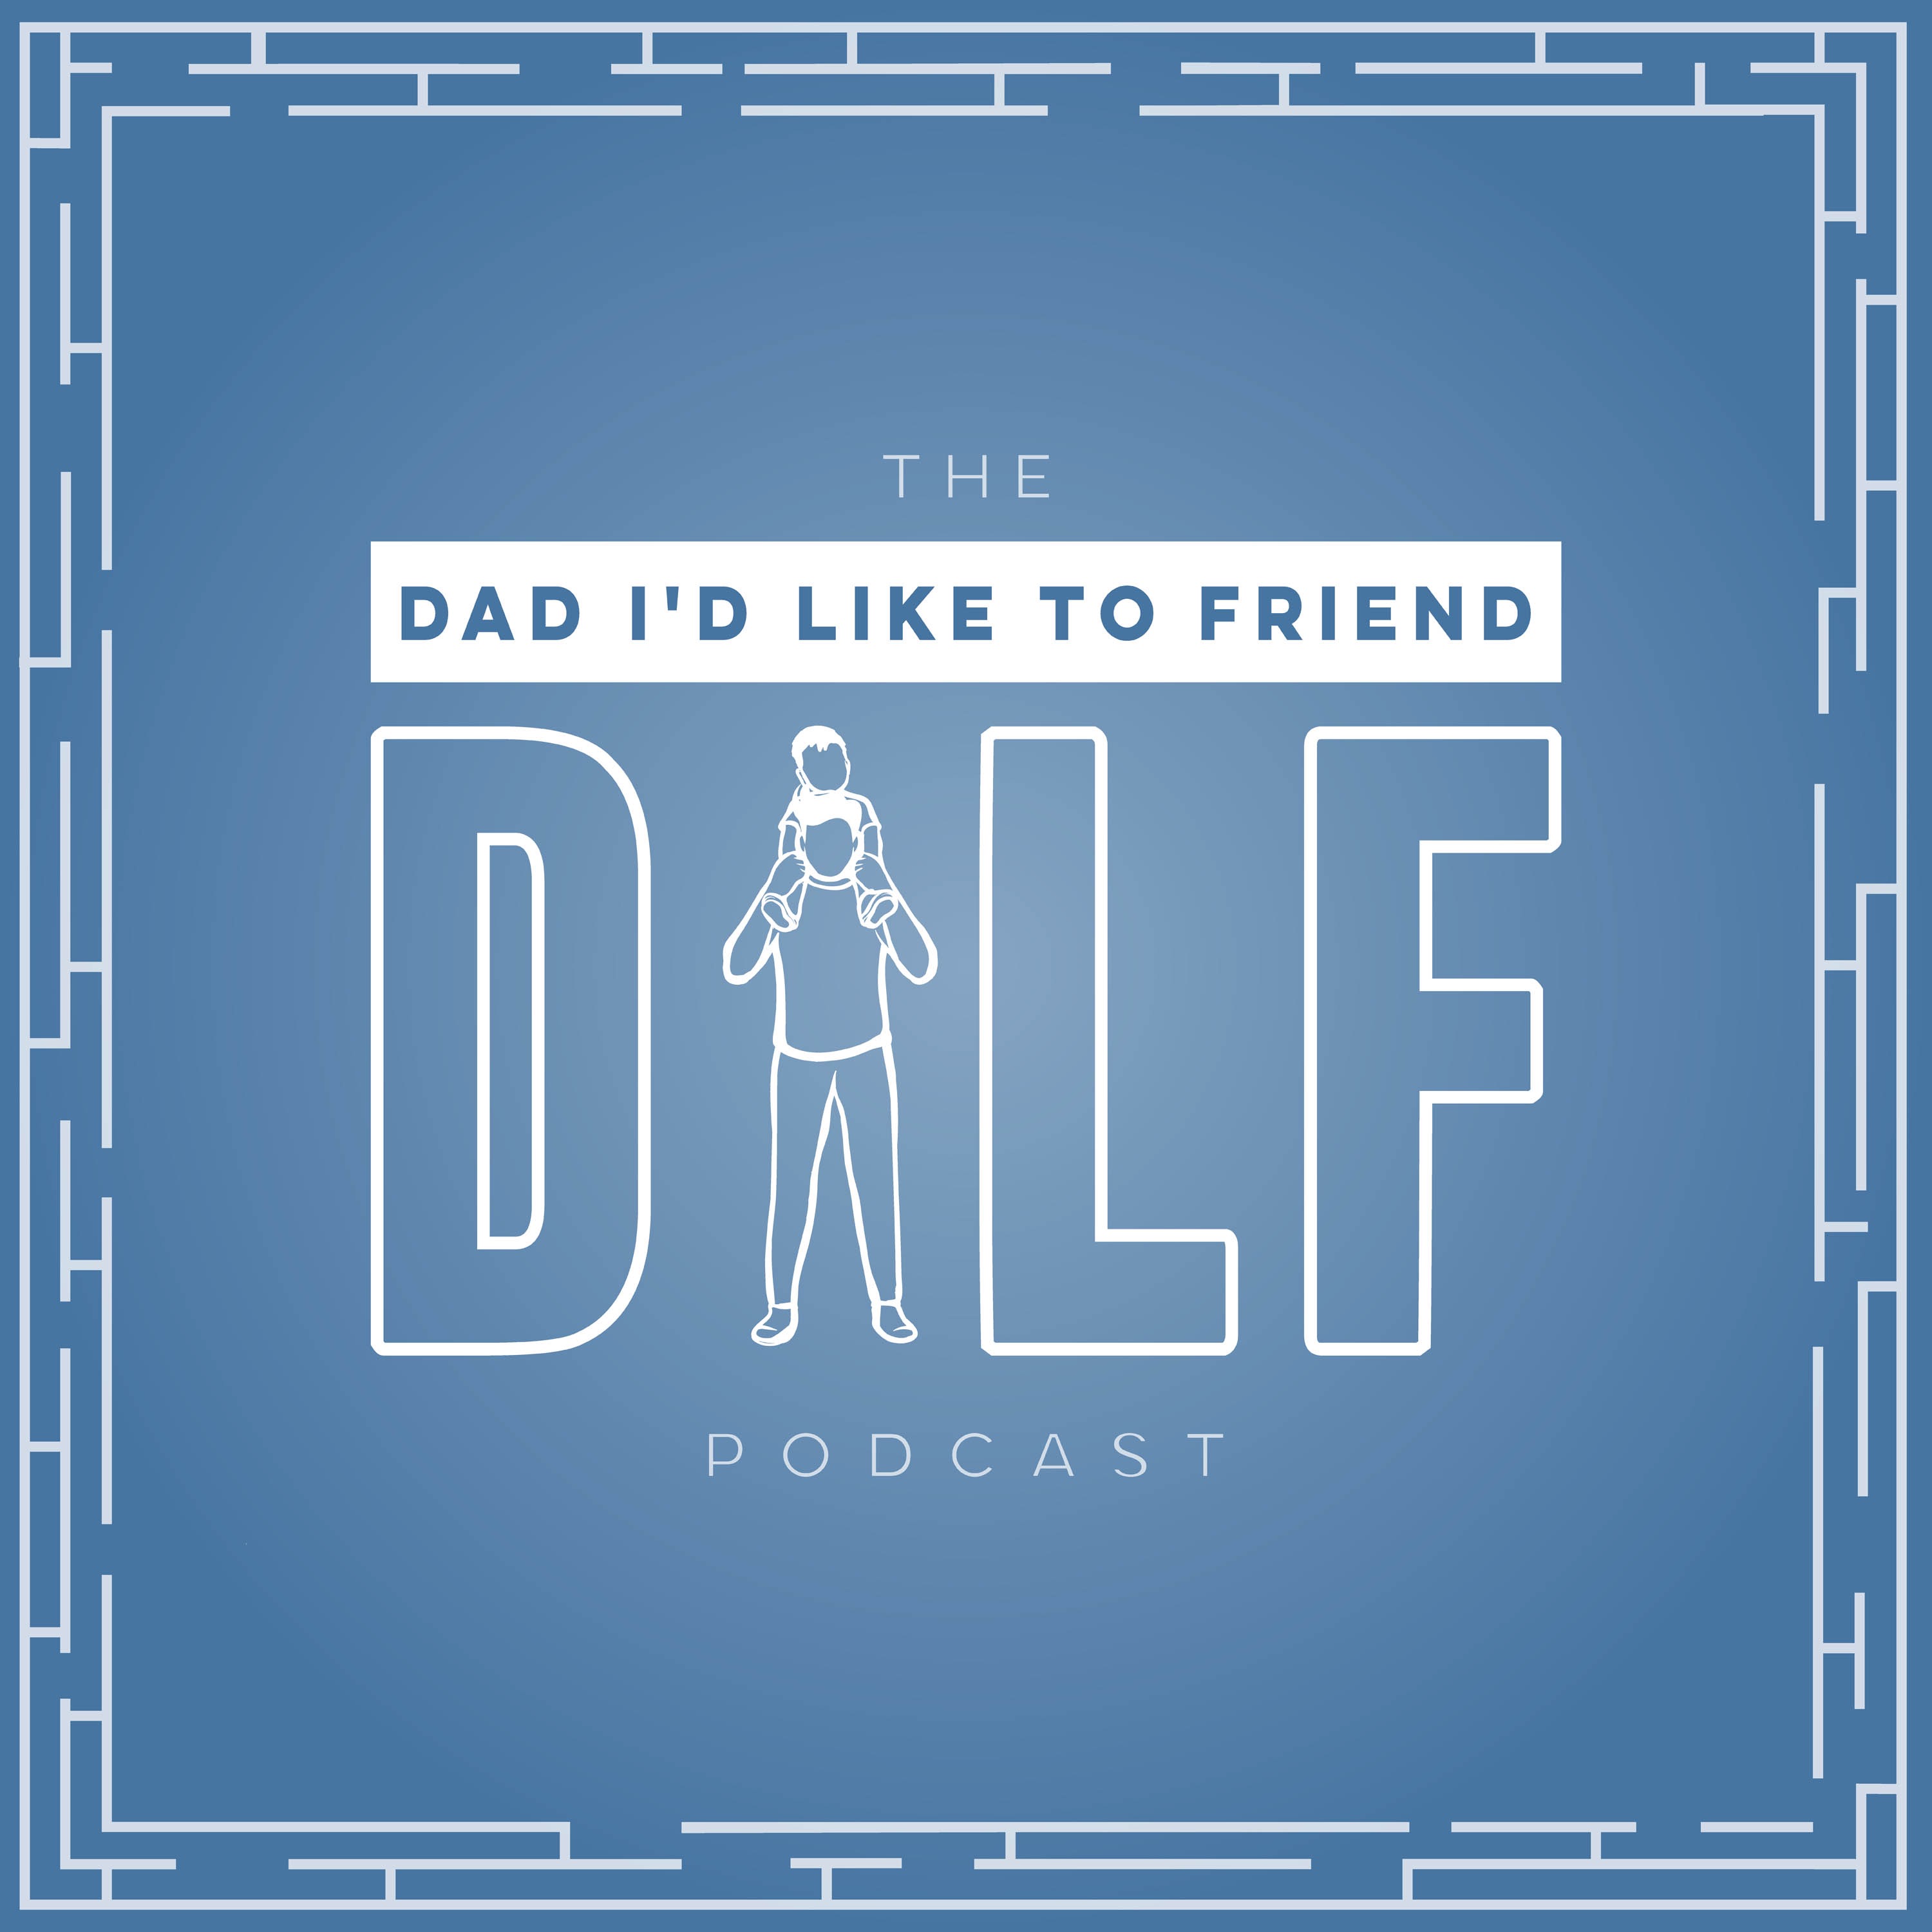 top parenting podcast, Dad I'd Like To Friend (The DILF Podcast)